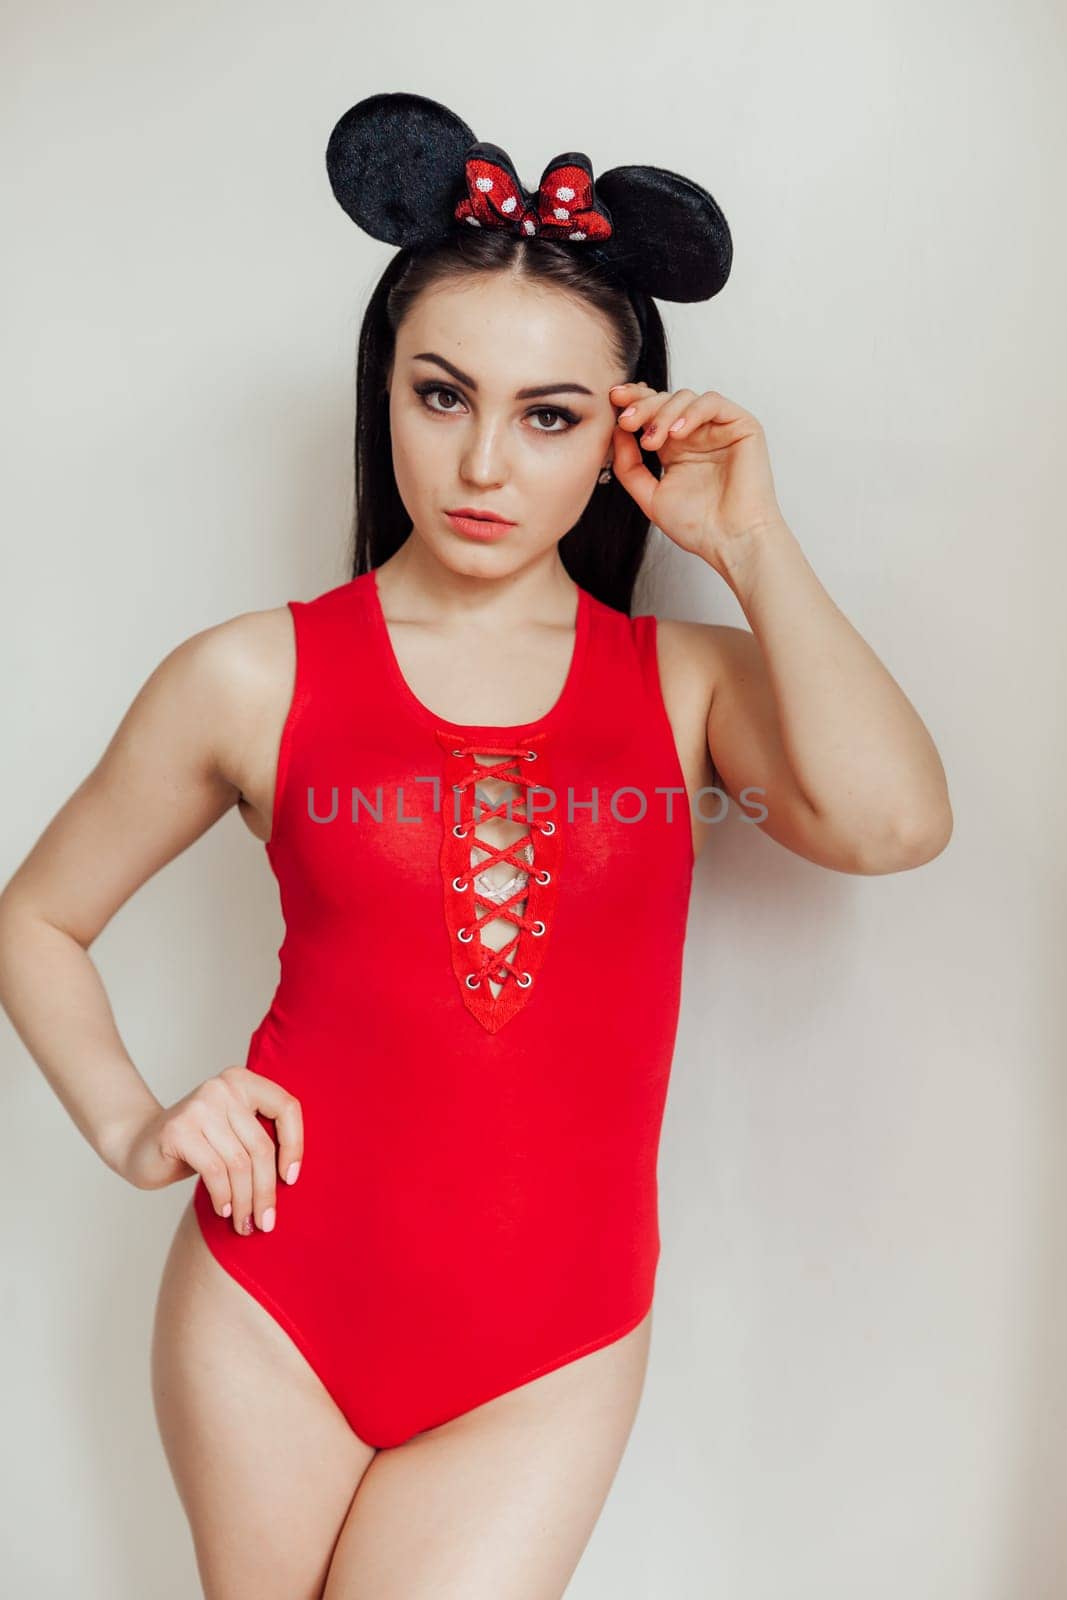 fashionable girl in red body posing on grey background 1